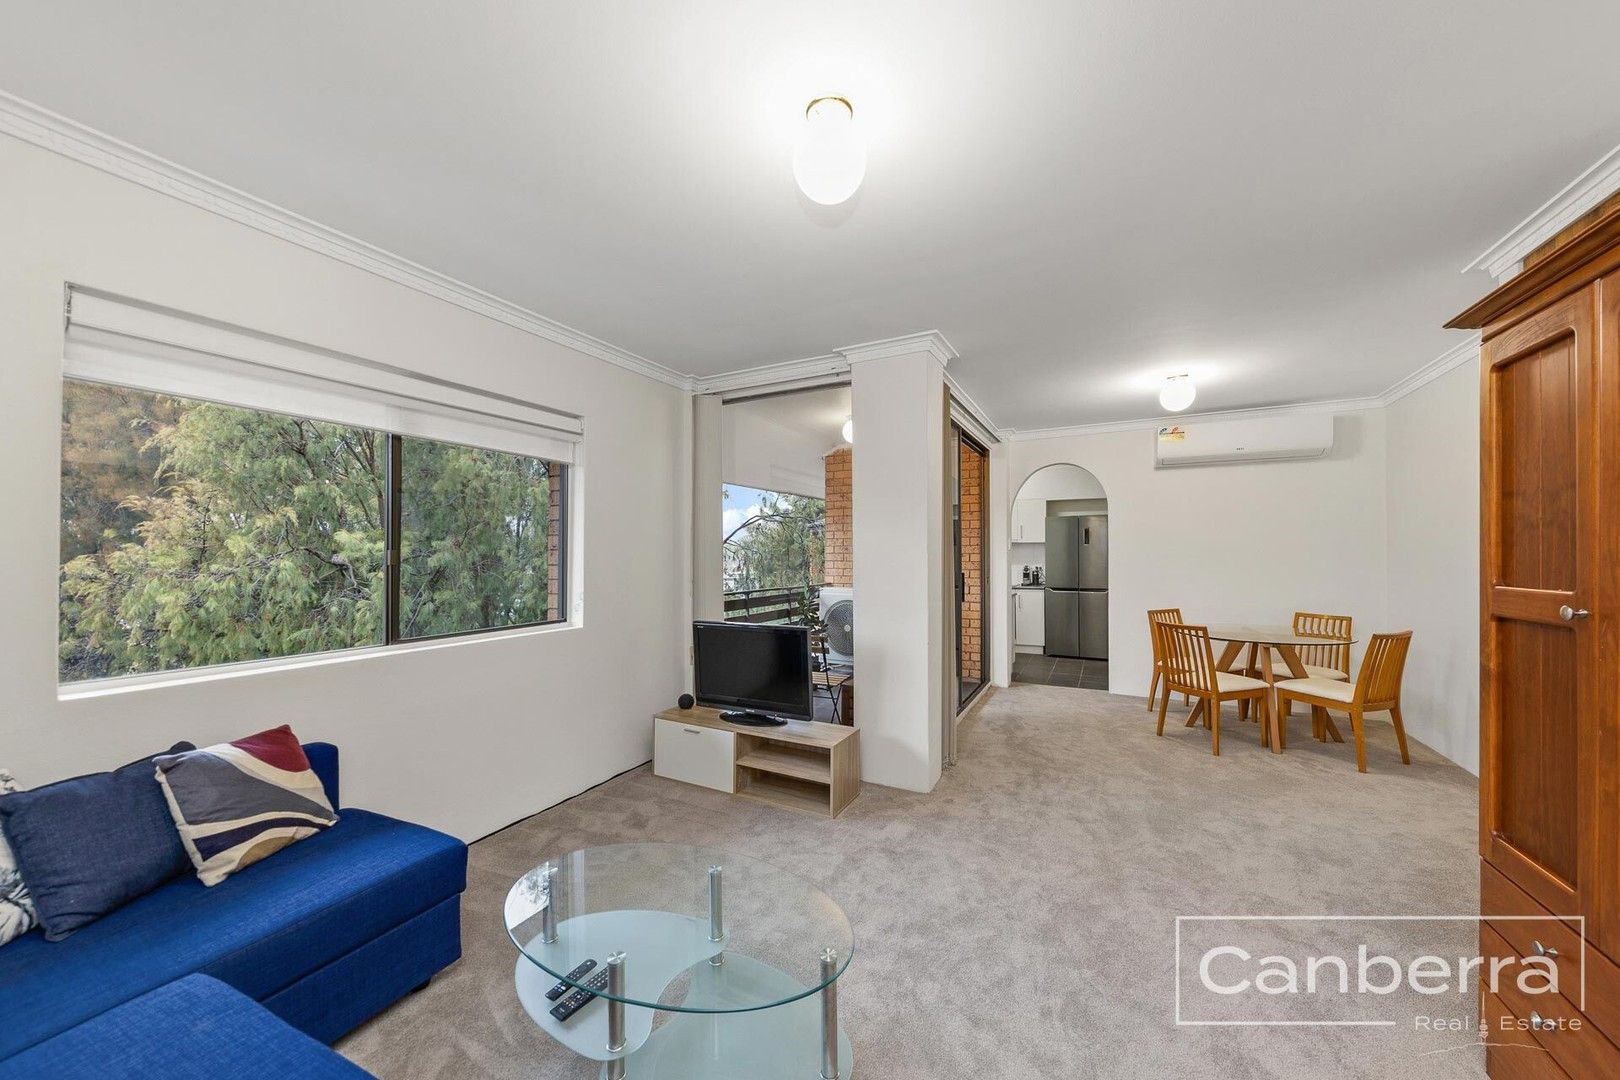 2 bedrooms Apartment / Unit / Flat in 69/17 Medley Street CHIFLEY ACT, 2606